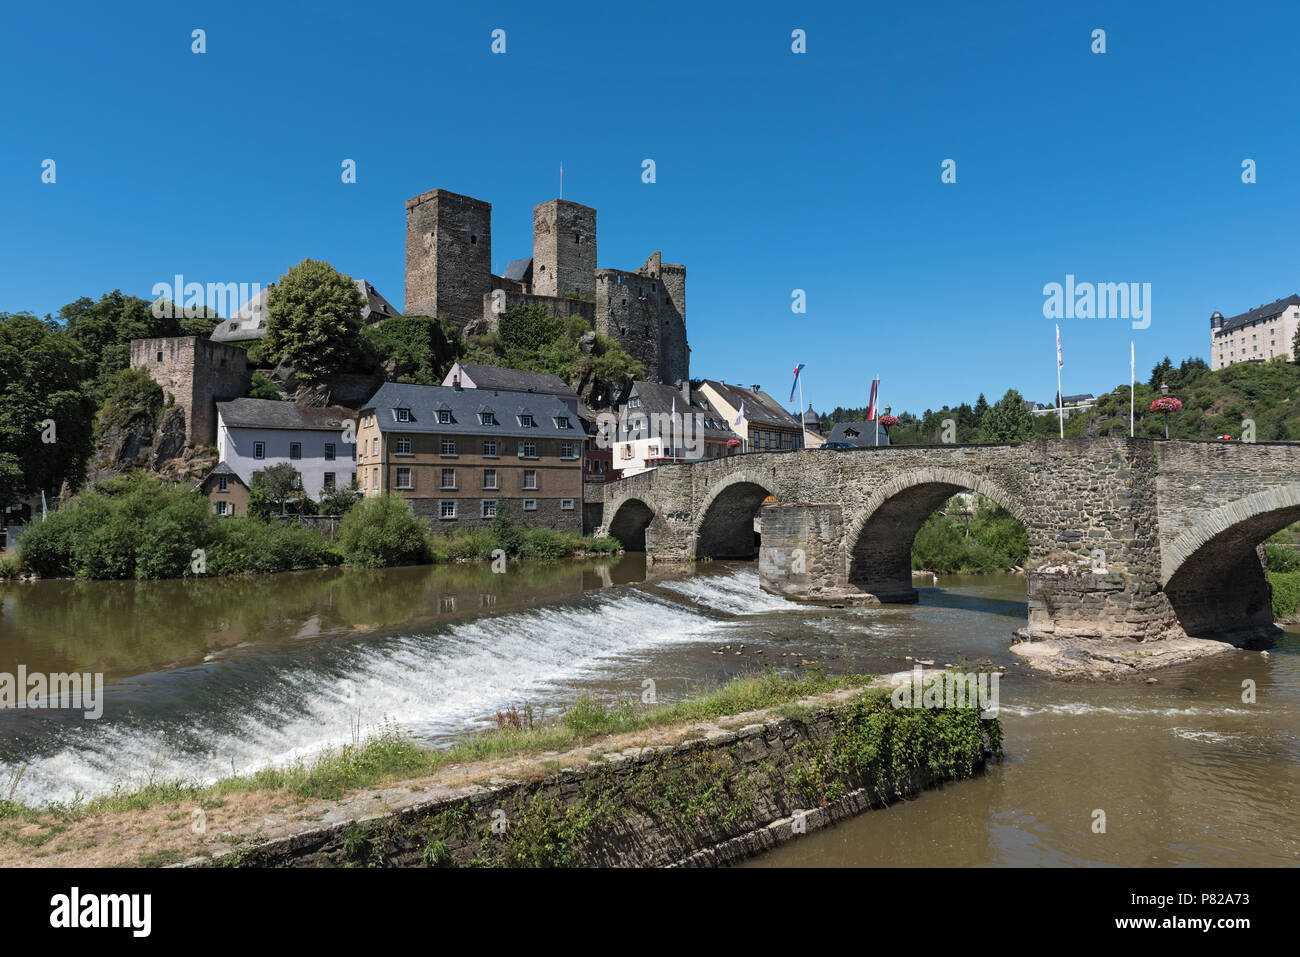 The castle of Runkel and the historic old town on the Lahn River, Hesse, Germany Stock Photo